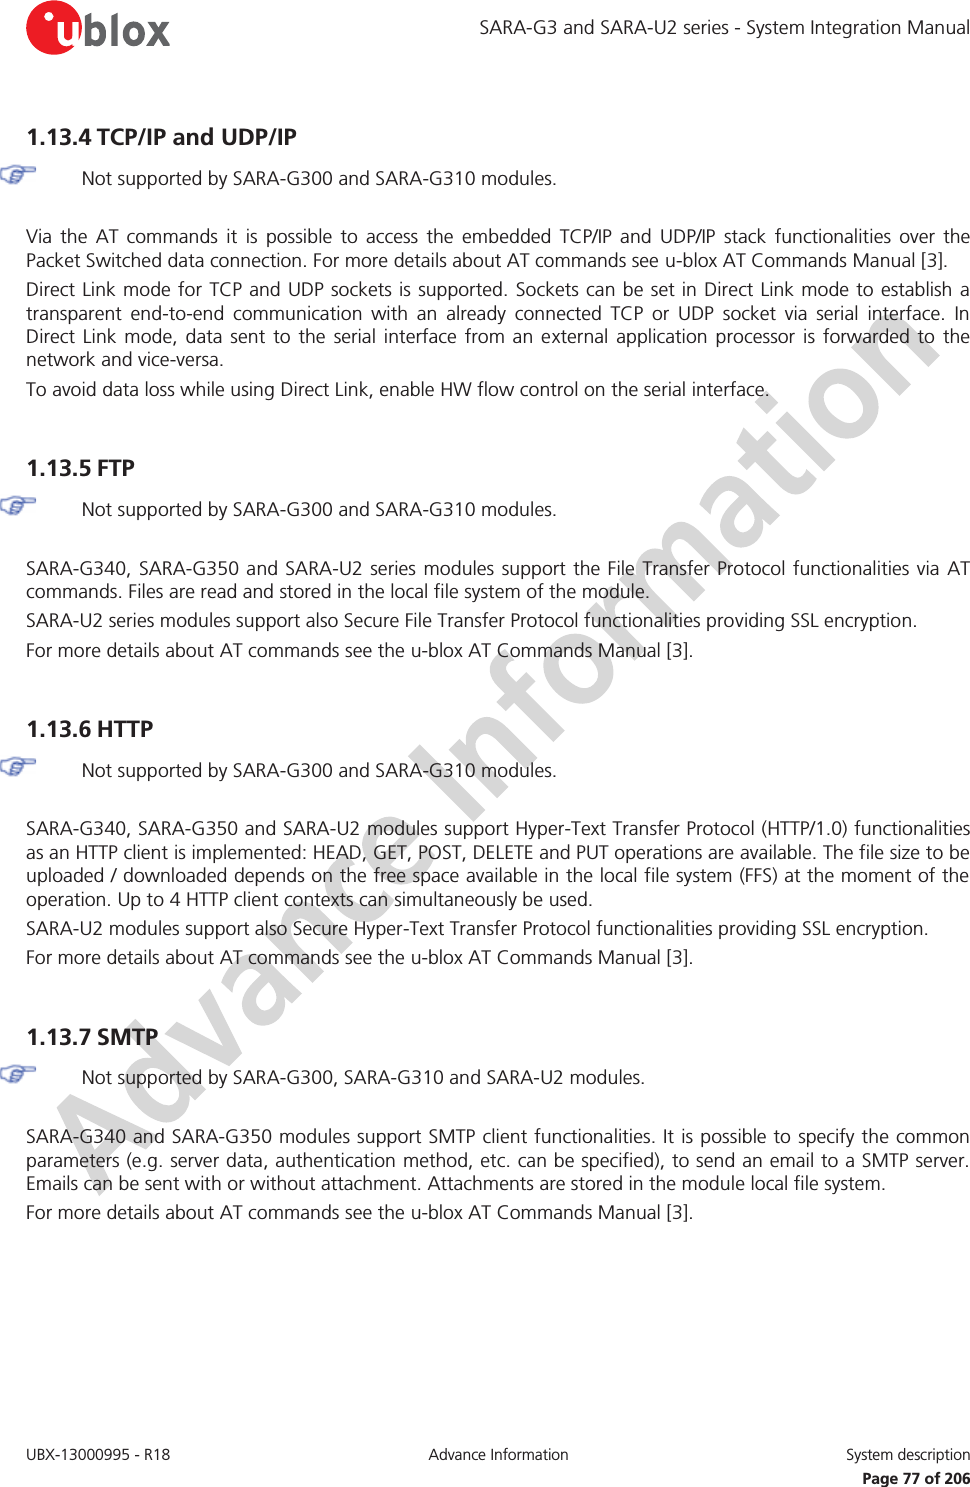 SARA-G3 and SARA-U2 series - System Integration Manual UBX-13000995 - R18  Advance Information  System description   Page 77 of 206 1.13.4 TCP/IP and UDP/IP   Not supported by SARA-G300 and SARA-G310 modules.  Via the AT commands it is possible to access the embedded TCP/IP and UDP/IP stack functionalities over the Packet Switched data connection. For more details about AT commands see u-blox AT Commands Manual [3]. Direct Link mode for TCP and UDP sockets is supported. Sockets can be set in Direct Link mode to establish a transparent end-to-end communication with an already connected TCP or UDP socket via serial interface. In Direct Link mode, data sent to the serial interface from an external application processor is forwarded to the network and vice-versa. To avoid data loss while using Direct Link, enable HW flow control on the serial interface.  1.13.5 FTP   Not supported by SARA-G300 and SARA-G310 modules.  SARA-G340, SARA-G350 and SARA-U2 series modules support the File Transfer Protocol functionalities via AT commands. Files are read and stored in the local file system of the module. SARA-U2 series modules support also Secure File Transfer Protocol functionalities providing SSL encryption. For more details about AT commands see the u-blox AT Commands Manual [3].  1.13.6 HTTP   Not supported by SARA-G300 and SARA-G310 modules.  SARA-G340, SARA-G350 and SARA-U2 modules support Hyper-Text Transfer Protocol (HTTP/1.0) functionalities as an HTTP client is implemented: HEAD, GET, POST, DELETE and PUT operations are available. The file size to be uploaded / downloaded depends on the free space available in the local file system (FFS) at the moment of the operation. Up to 4 HTTP client contexts can simultaneously be used. SARA-U2 modules support also Secure Hyper-Text Transfer Protocol functionalities providing SSL encryption. For more details about AT commands see the u-blox AT Commands Manual [3].  1.13.7 SMTP   Not supported by SARA-G300, SARA-G310 and SARA-U2 modules.  SARA-G340 and SARA-G350 modules support SMTP client functionalities. It is possible to specify the common parameters (e.g. server data, authentication method, etc. can be specified), to send an email to a SMTP server. Emails can be sent with or without attachment. Attachments are stored in the module local file system. For more details about AT commands see the u-blox AT Commands Manual [3].  